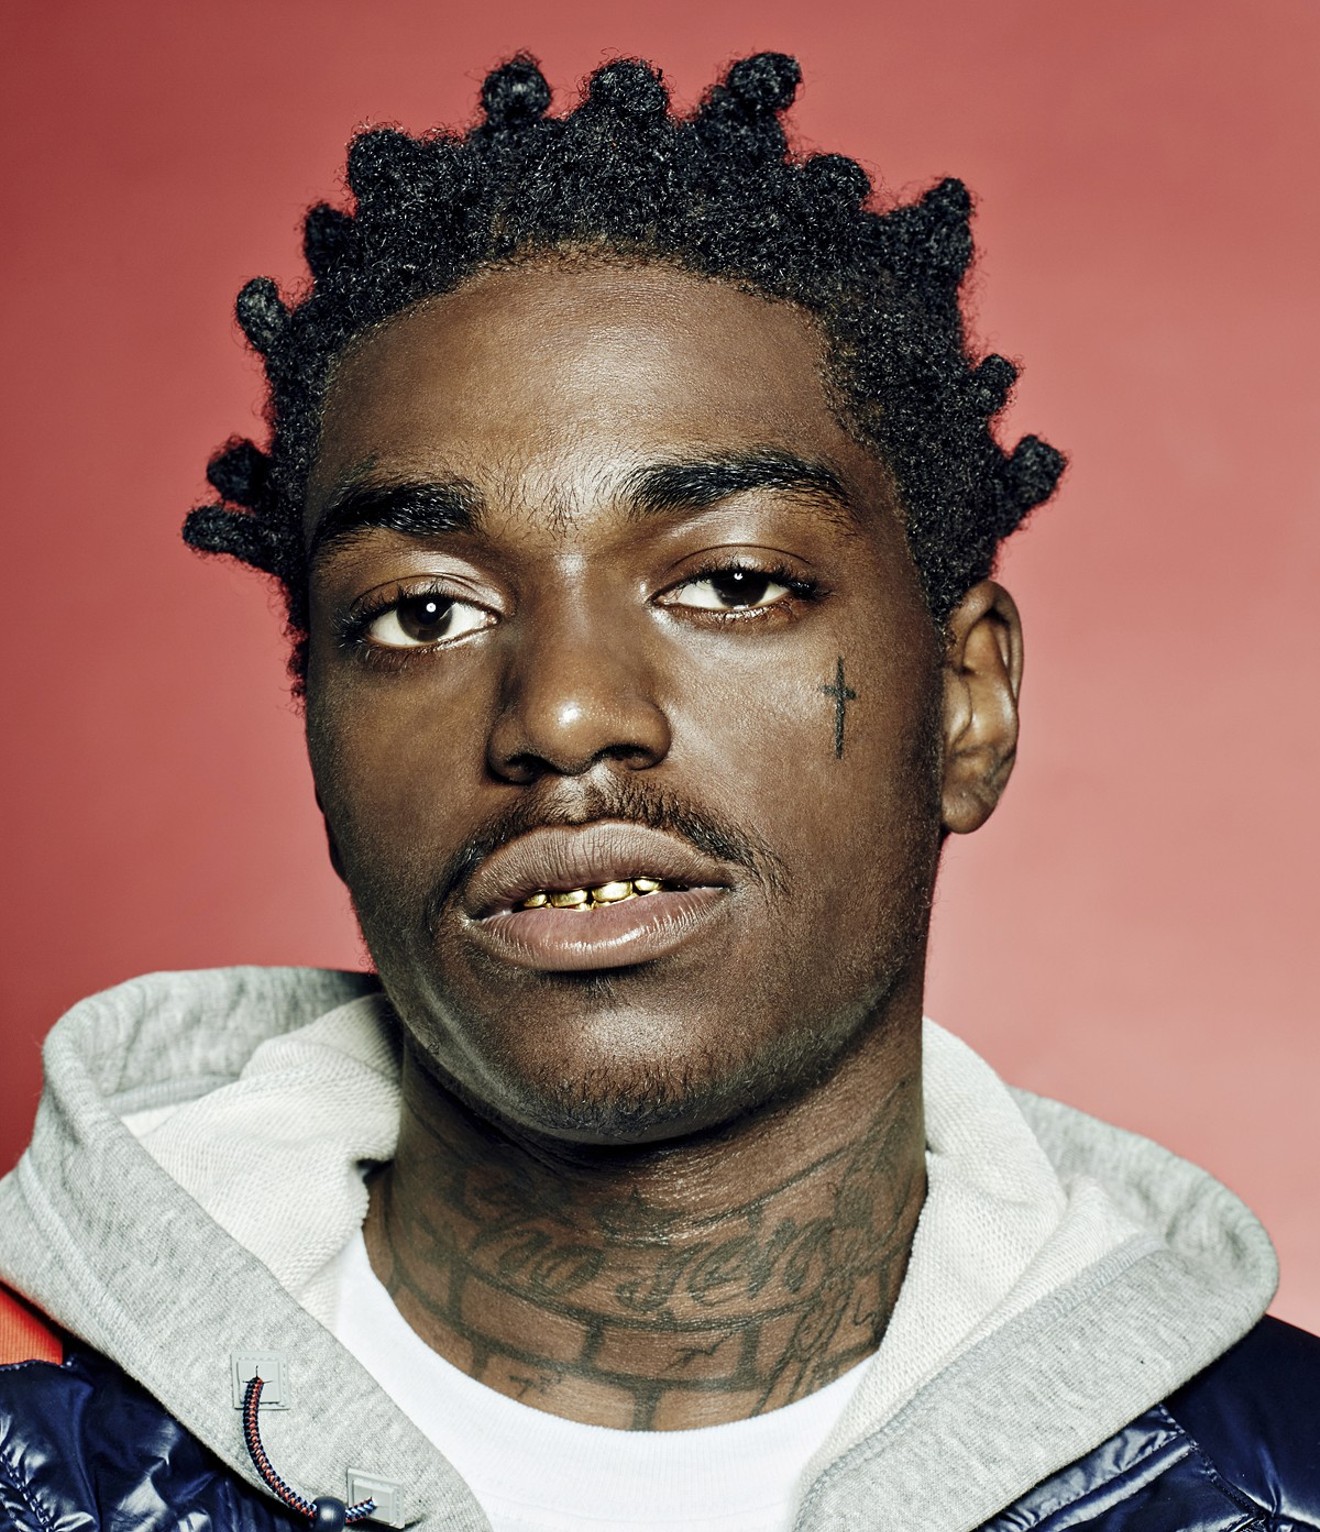 Over the past three years, Kodak Black has transformed from an unknown teenager to one of the hottest rappers in the nation.